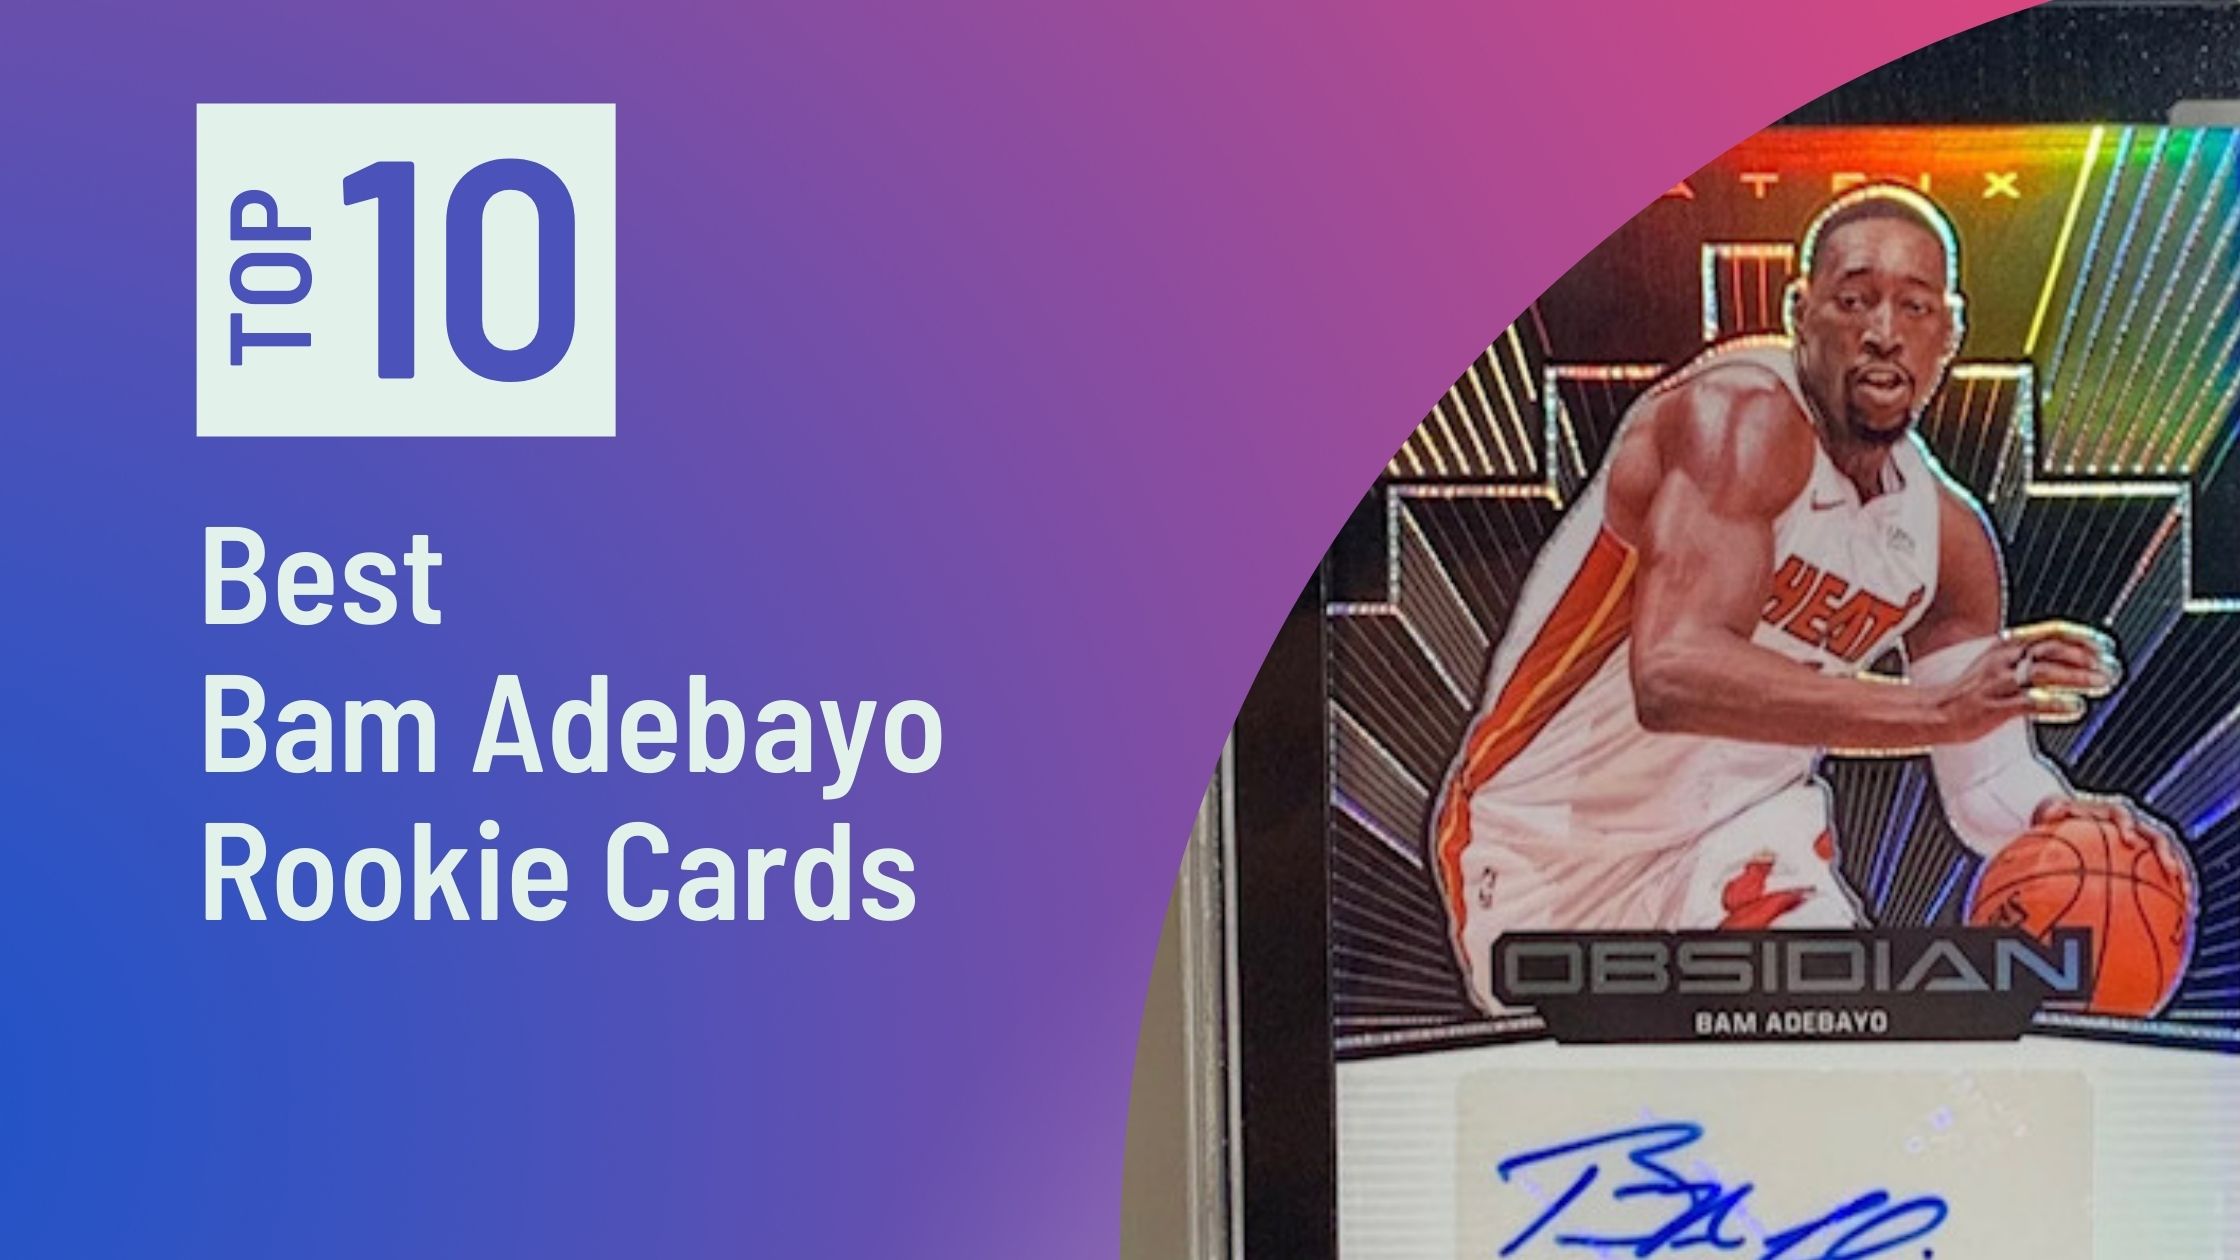 Featured Image for the Best Bam Adebayo Rookie Cards blog post.